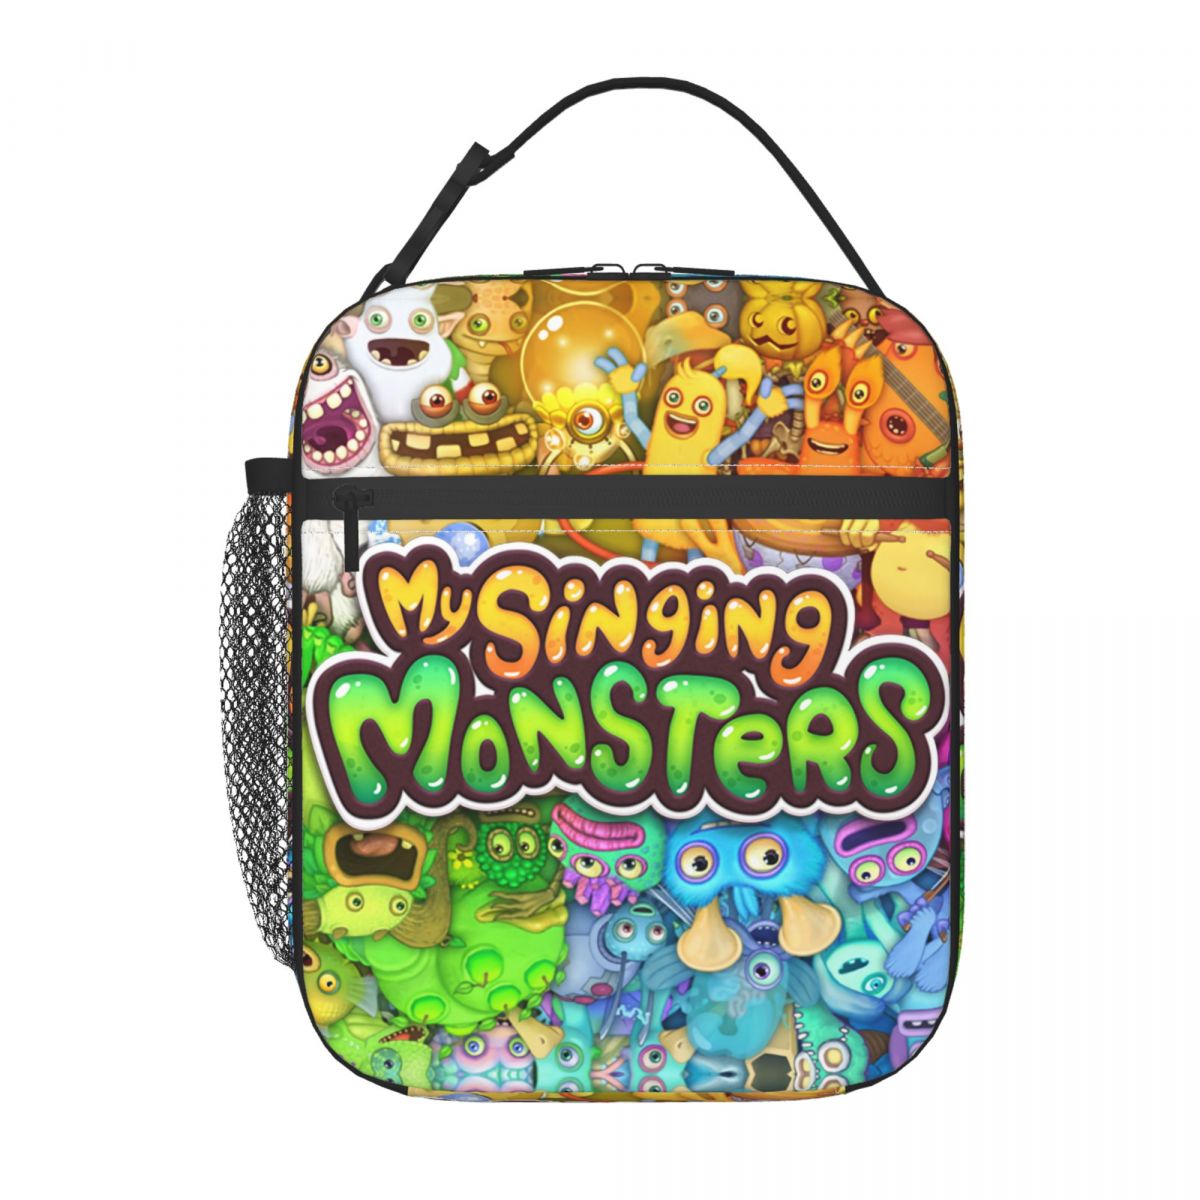 My Singing Monsters Thermal Insulated Lunch Bag Cartoon Anime Game Portable Lunch Container Travel Multifunction Food 1 - My Singing Monsters Plush